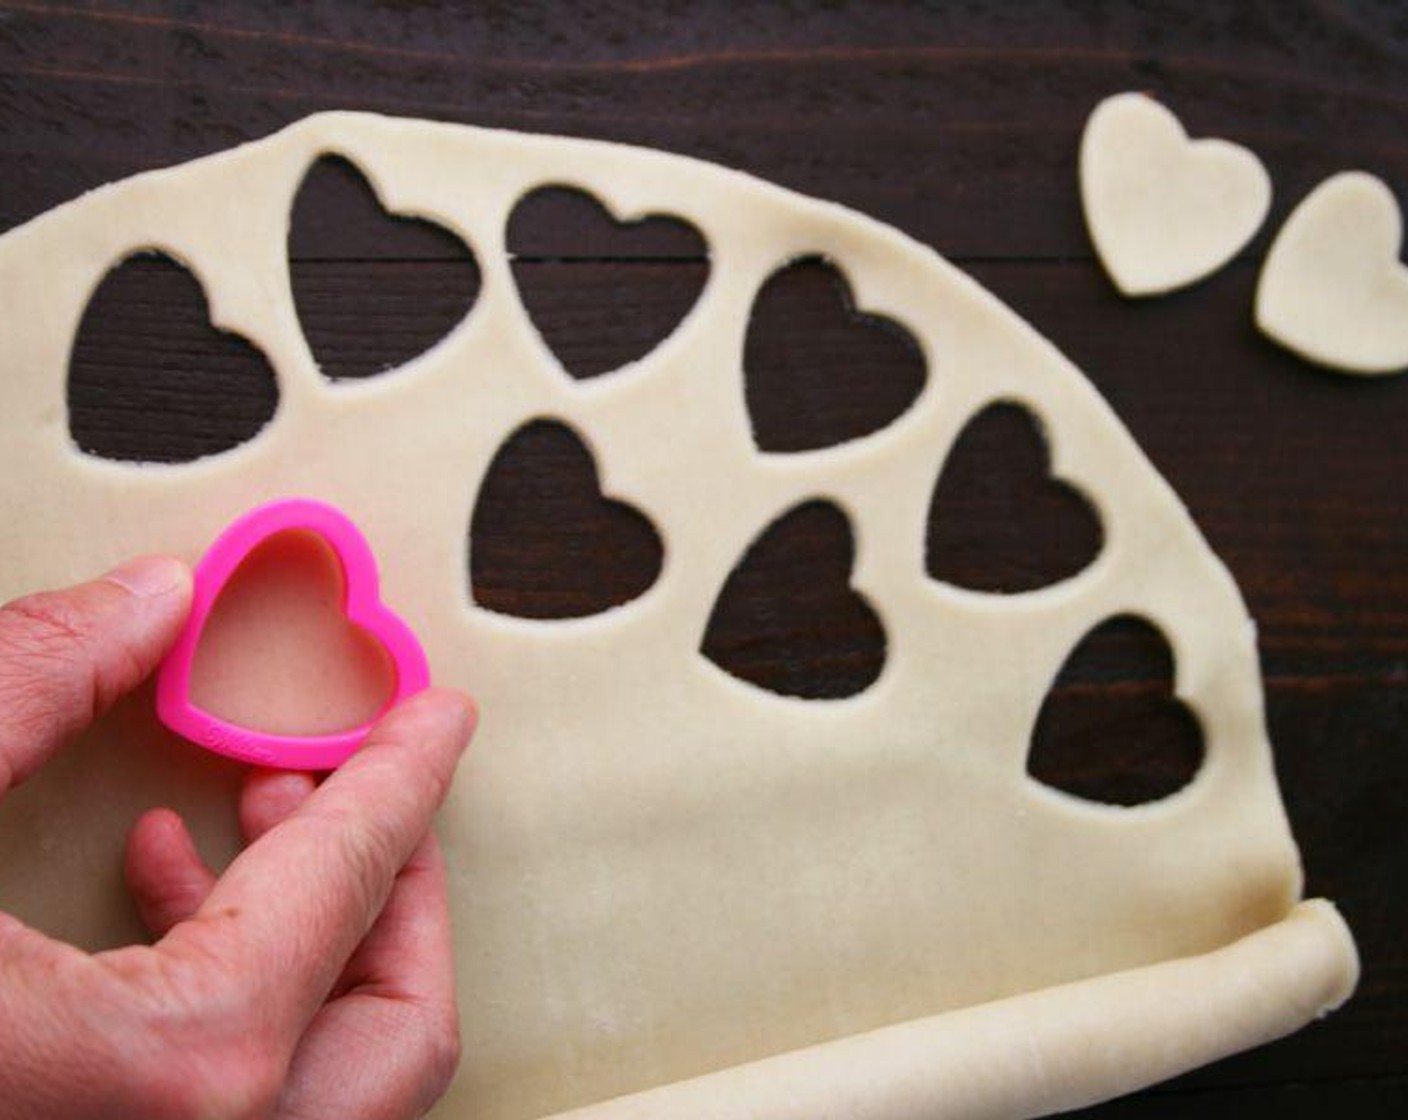 step 3 Spread the other Pie Crust (1) on a lightly floured surface and cut small hearts out using a 1-inch heart cookie cutter. Cut as many hearts as you can.